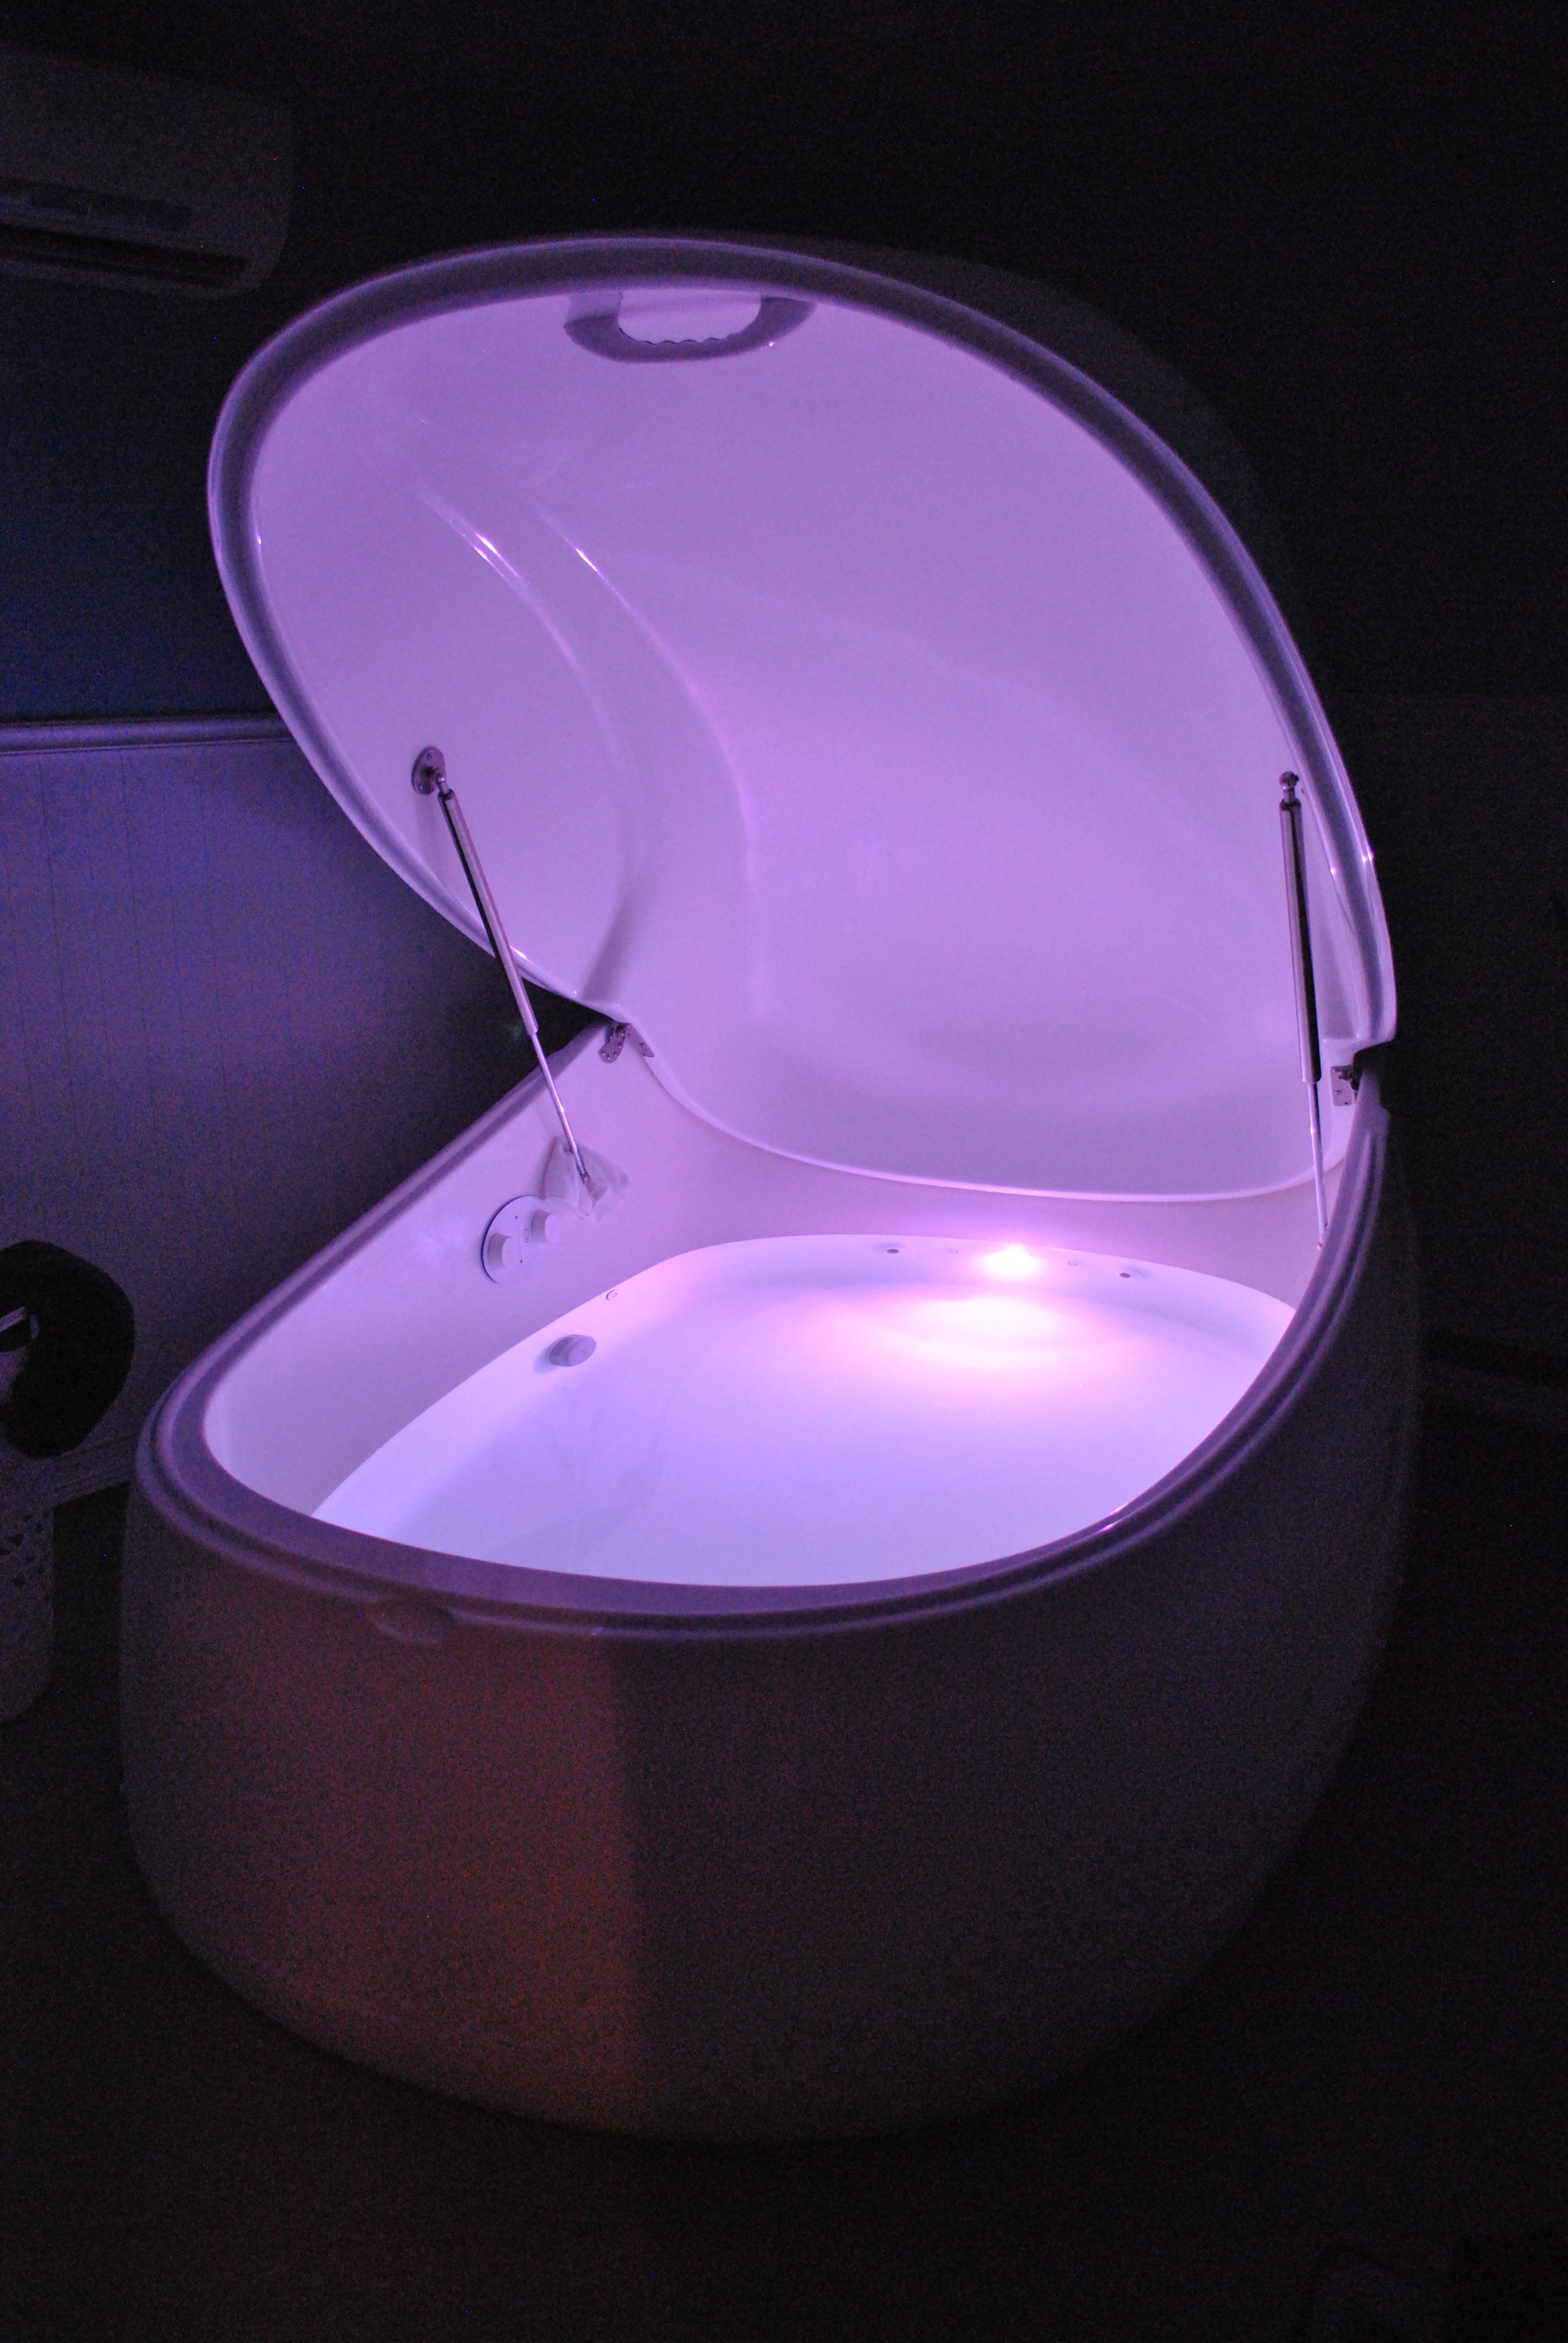 I slept all night in a sensory deprivation tank.